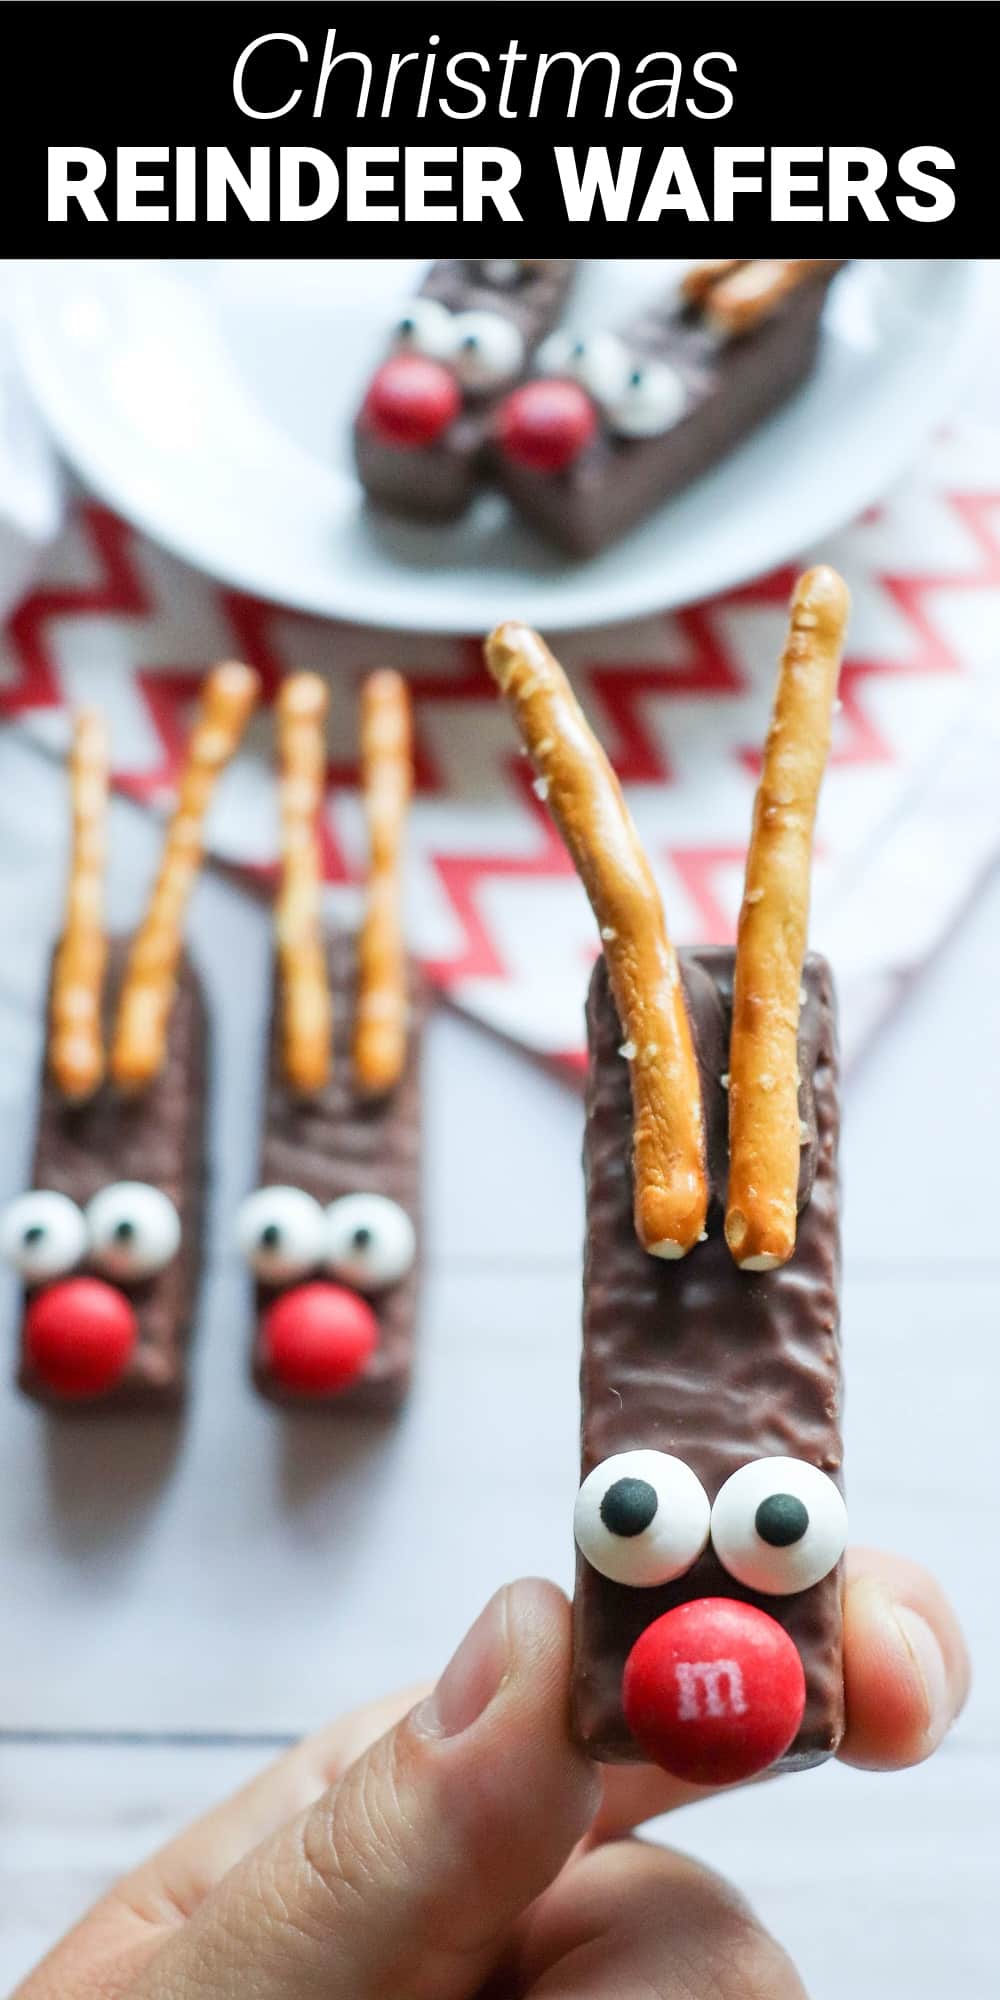 These adorable reindeer wafers turn an ordinary store-bought cookie into a festive homemade holiday treat. Melted chocolate is used to “glue” pretzel antlers, candy eyes, and M&M noses onto each cookie, turning it into a cute and fun reindeer face.